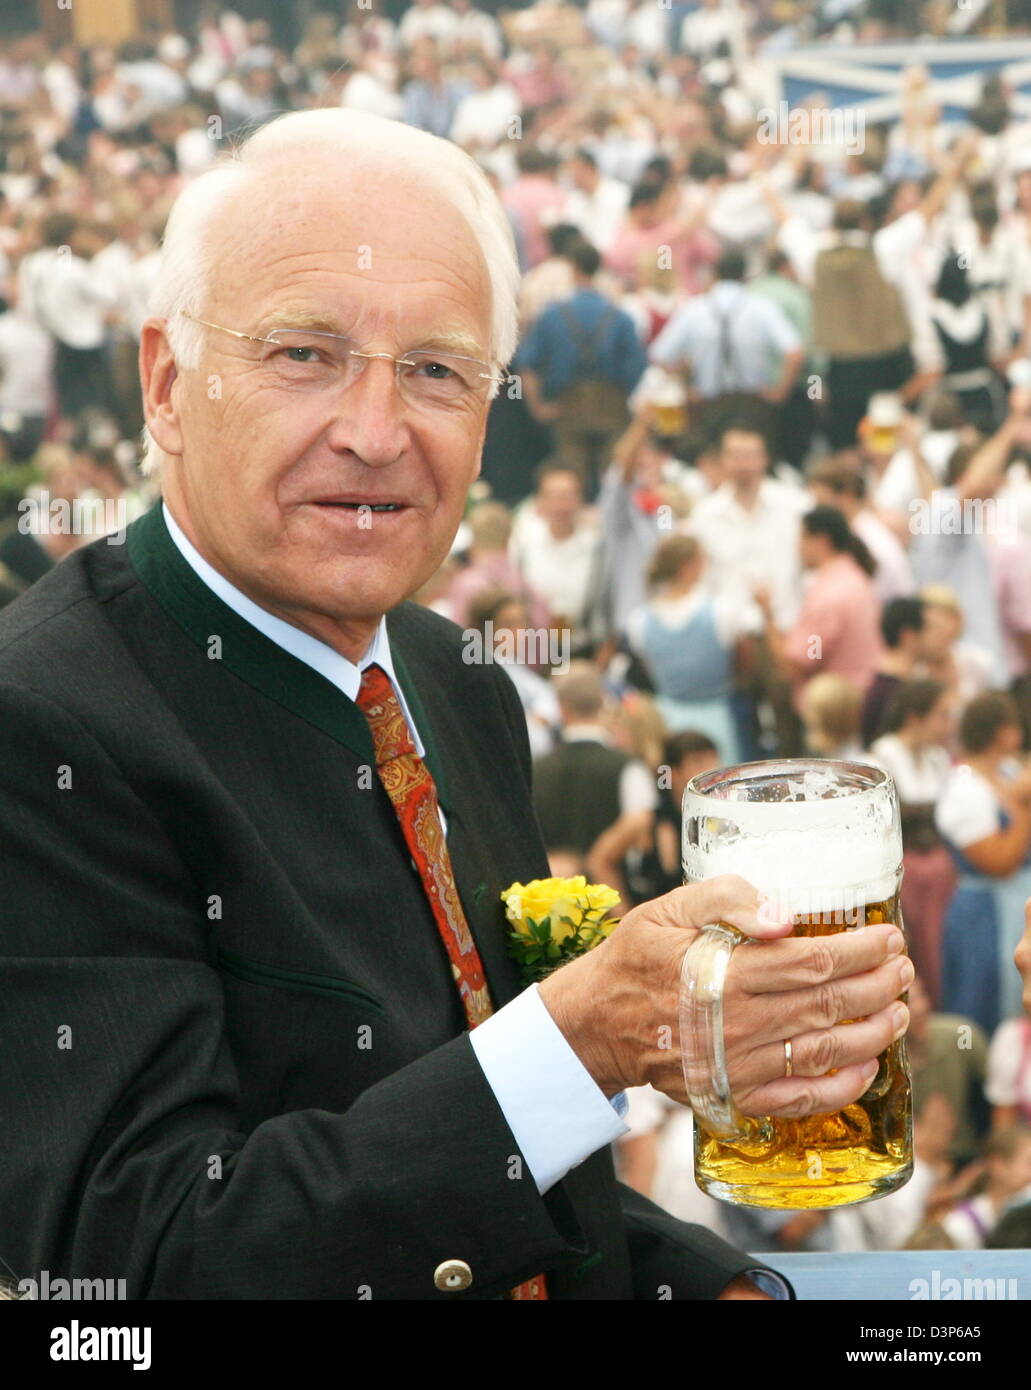 Bavaria's Prime Minister Edmund Stoiber poses at pavilion 'Schottenhammelzelt' during the 173rd 'Oktoberfest' in Munich, Germany, Saturday 16 September 2006. The Munich Beer Festival, which is the world's largest folk feast, continues for the next 18 days. Photo: Volker Dornberger Stock Photo